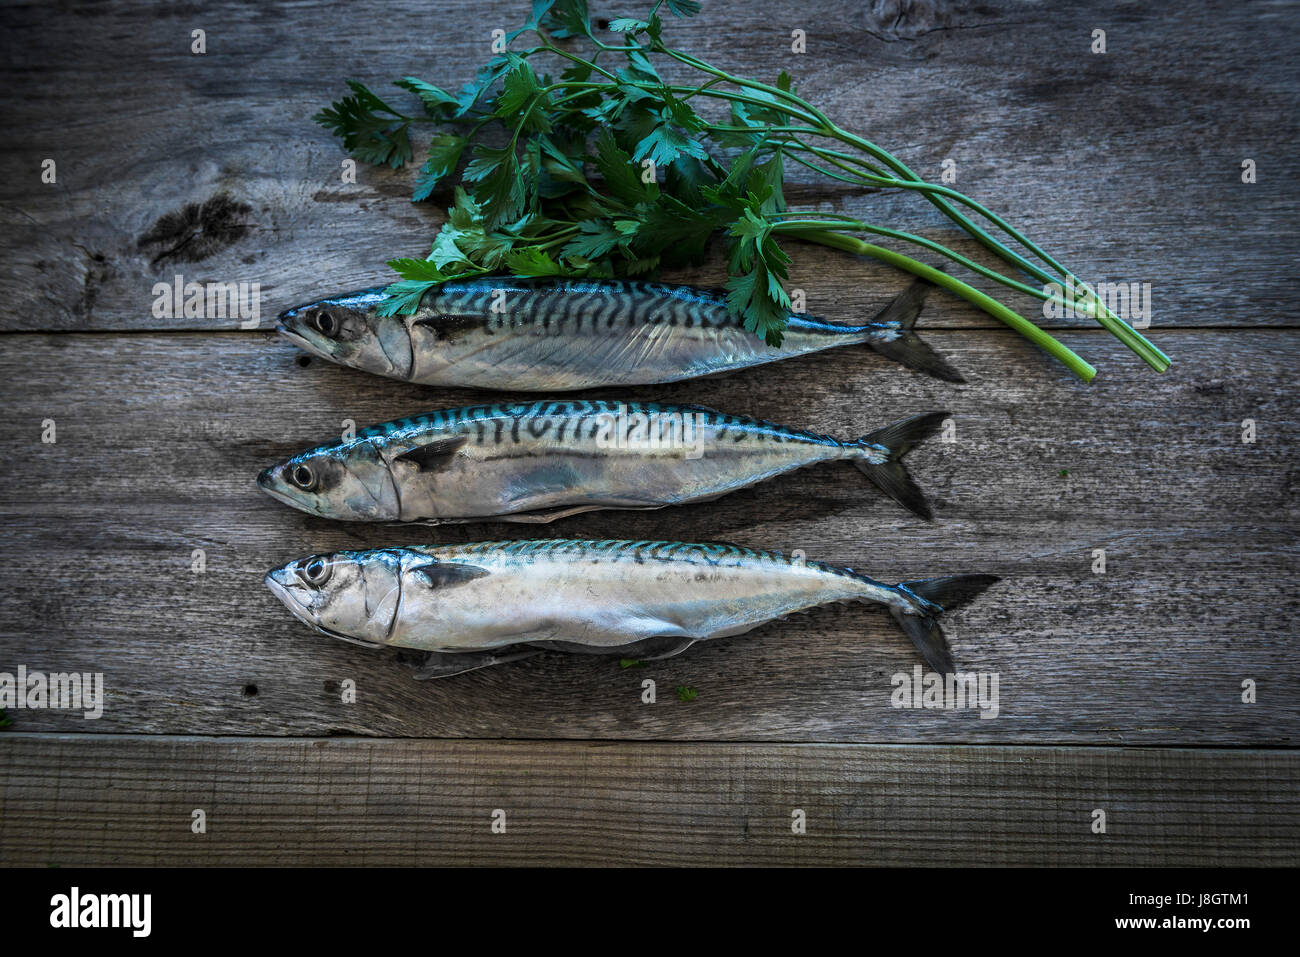 An overhead view of three mackerel; Herbs; Flat leaved parsley; Food; Fish; Seafood; Pelagic fish; Ingredients for a meal; Uncooked; Raw; Healthy food Stock Photo